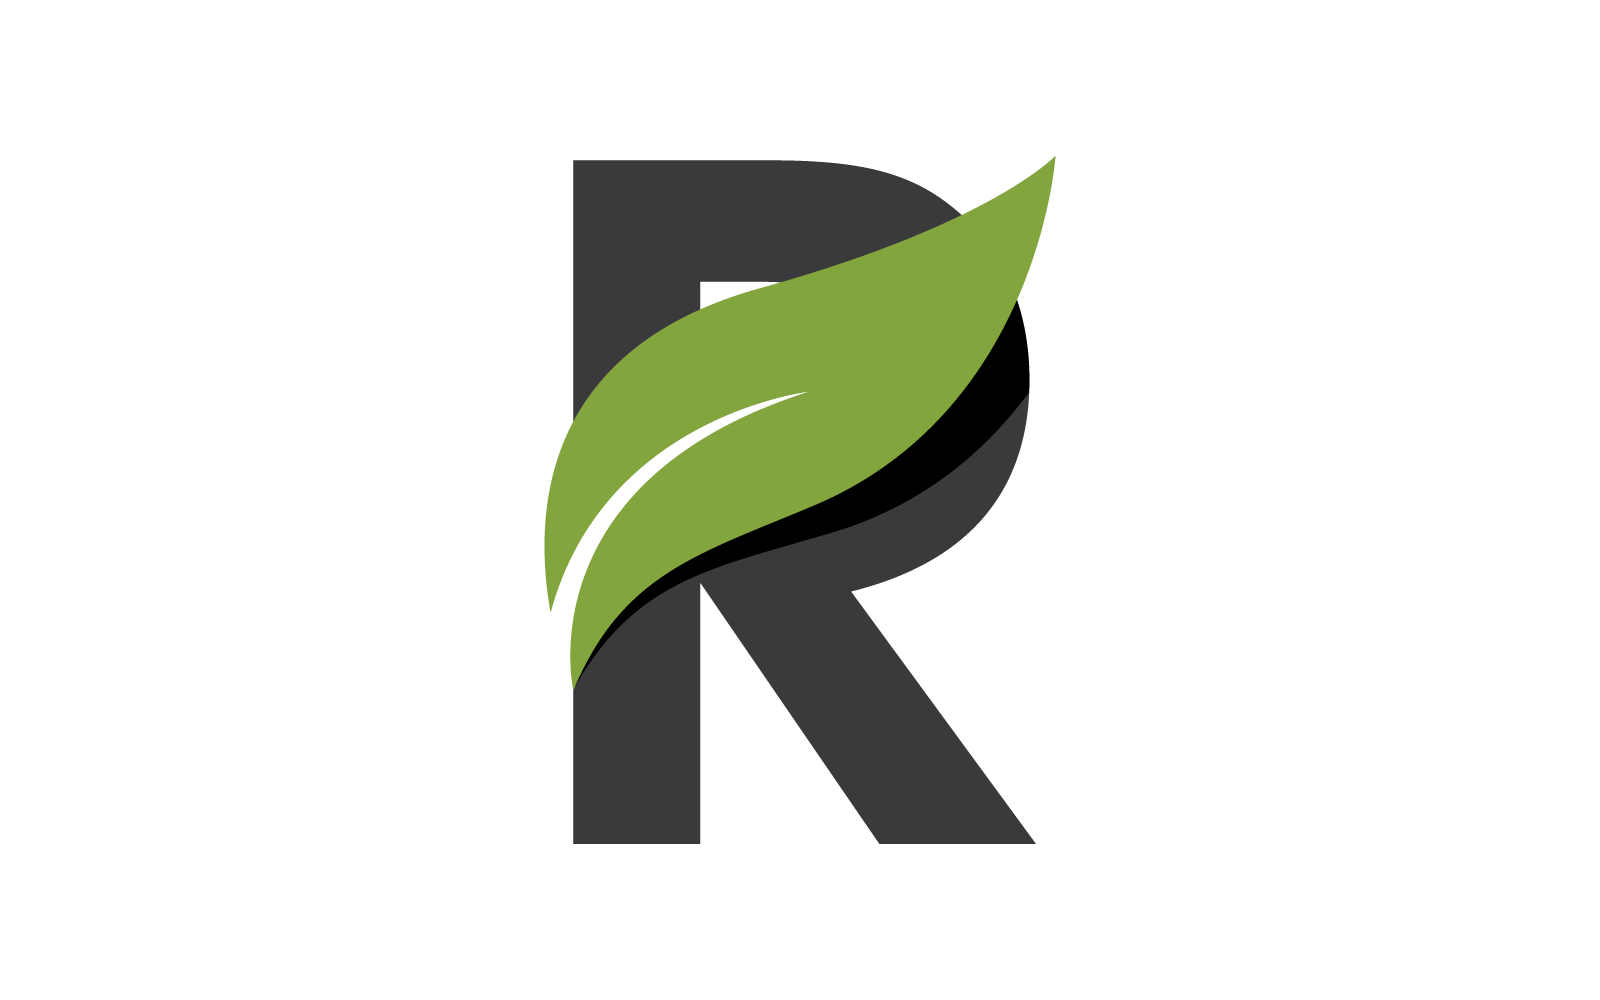 R Initial letter with green leaf logo vector flat design